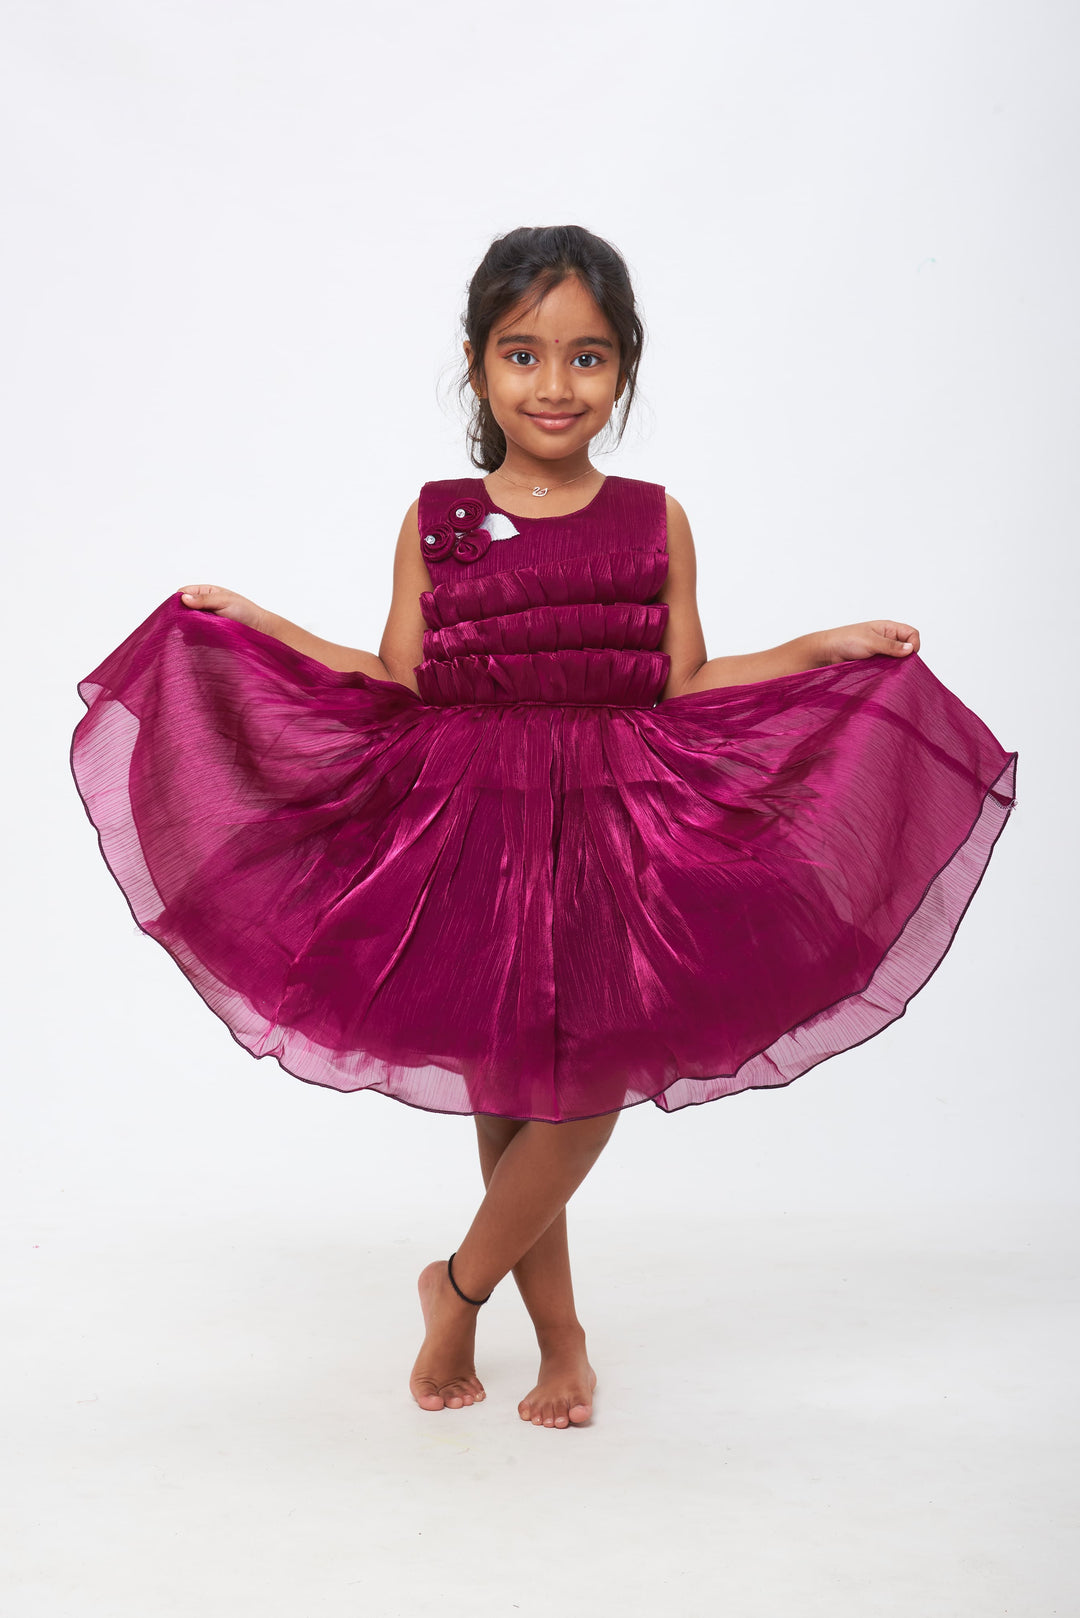 The Nesavu Girls Fancy Party Frock Royal Radiance: Girls Deep Purple Tulle Dress with Rosette Accents Nesavu 16 (1Y) / Purple / Satin Organza PF155B-16 From Playdates to Parties | Girls Chic Frocks Collection | The Nesavu